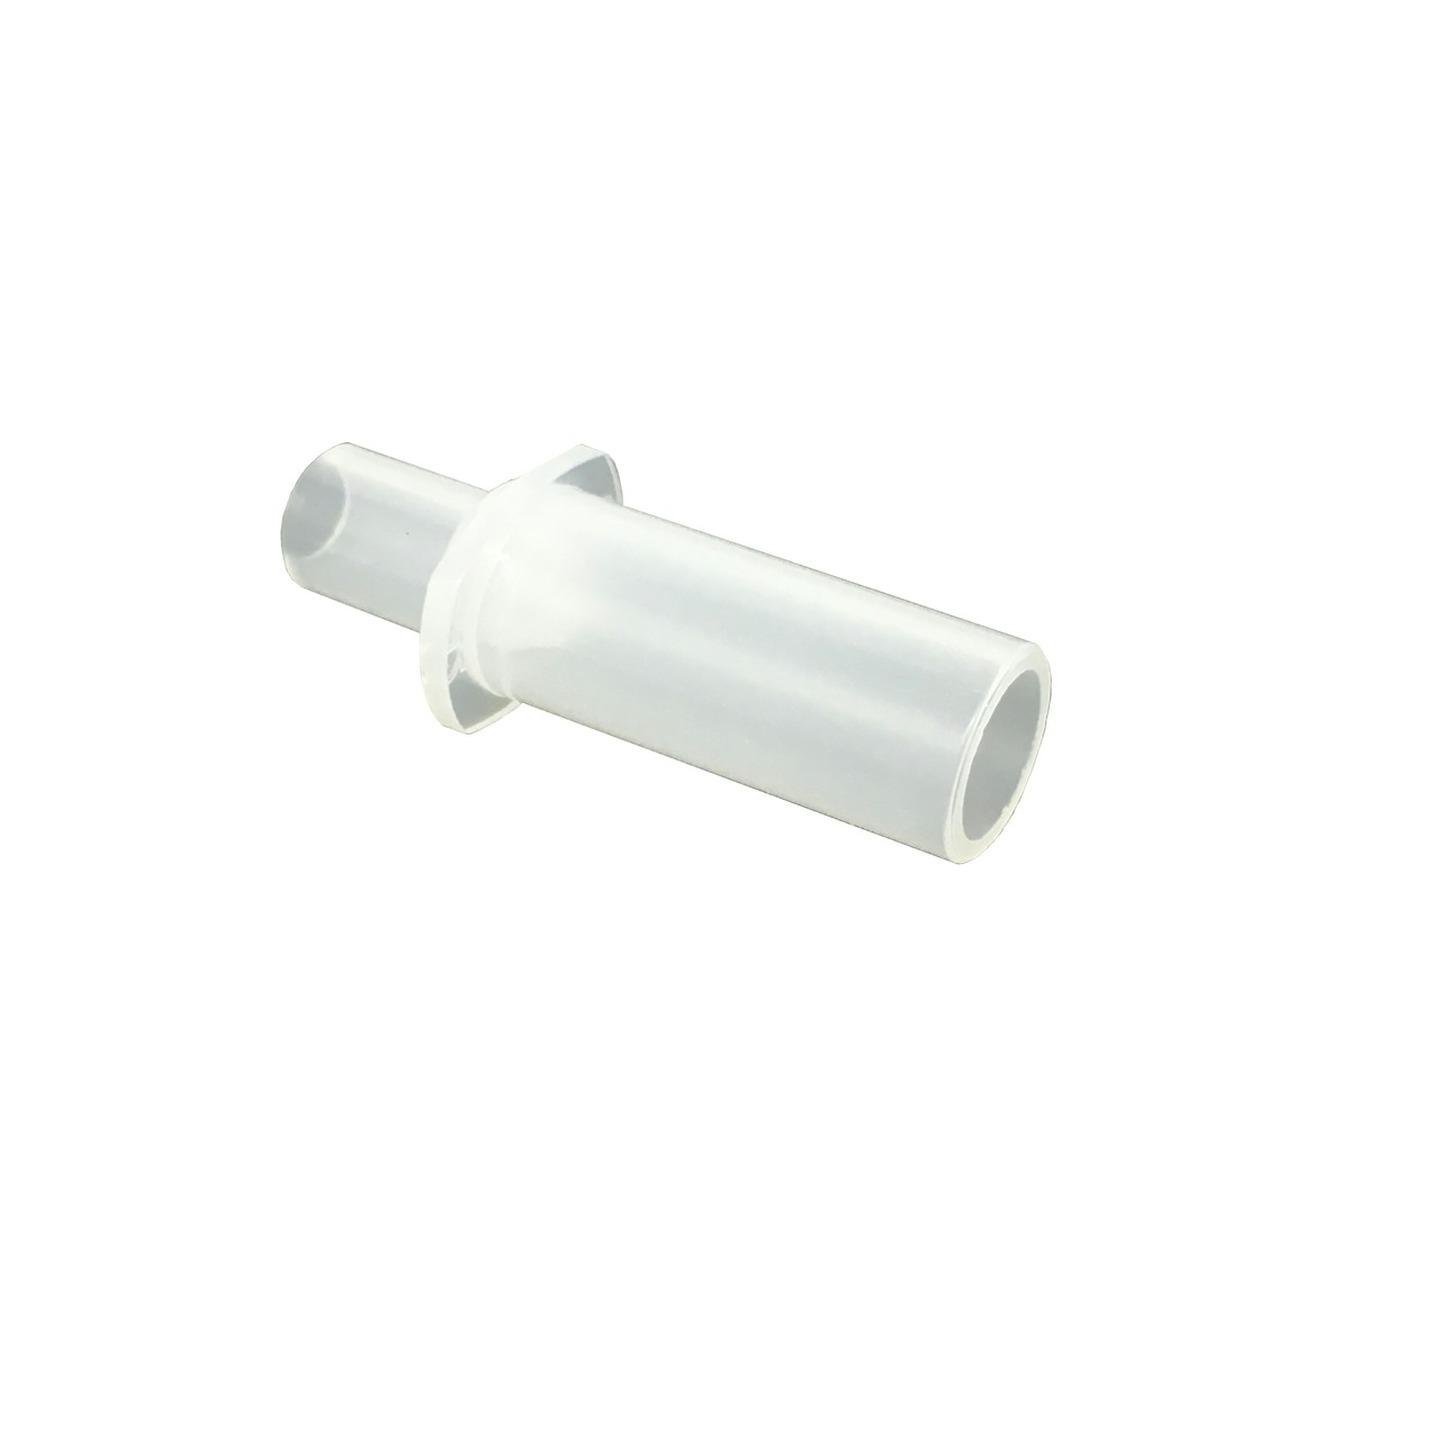 Spare Mouthpieces for Response QM7308 Breathalyser